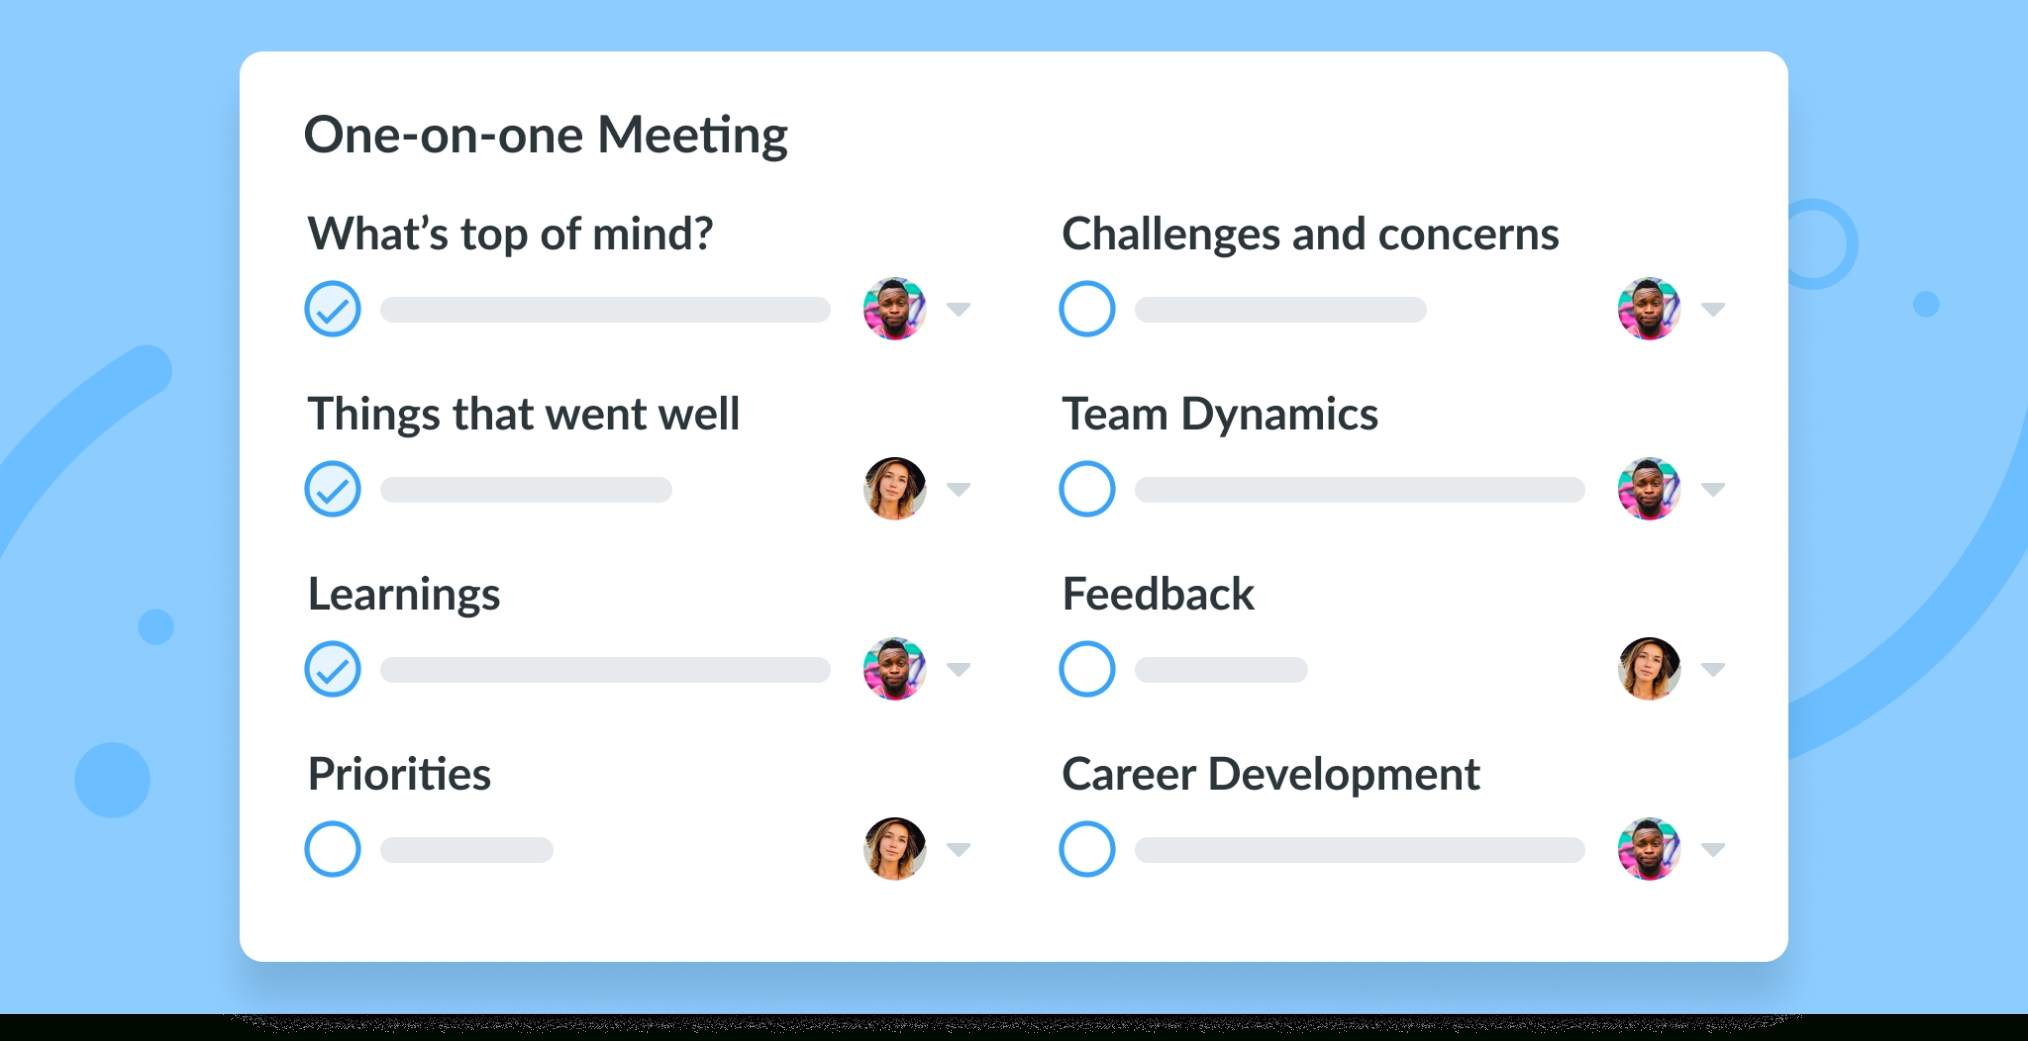 10 One On One Meeting Templates For Engaged Teams | By Fellow App For 1 On 1 Meeting Template